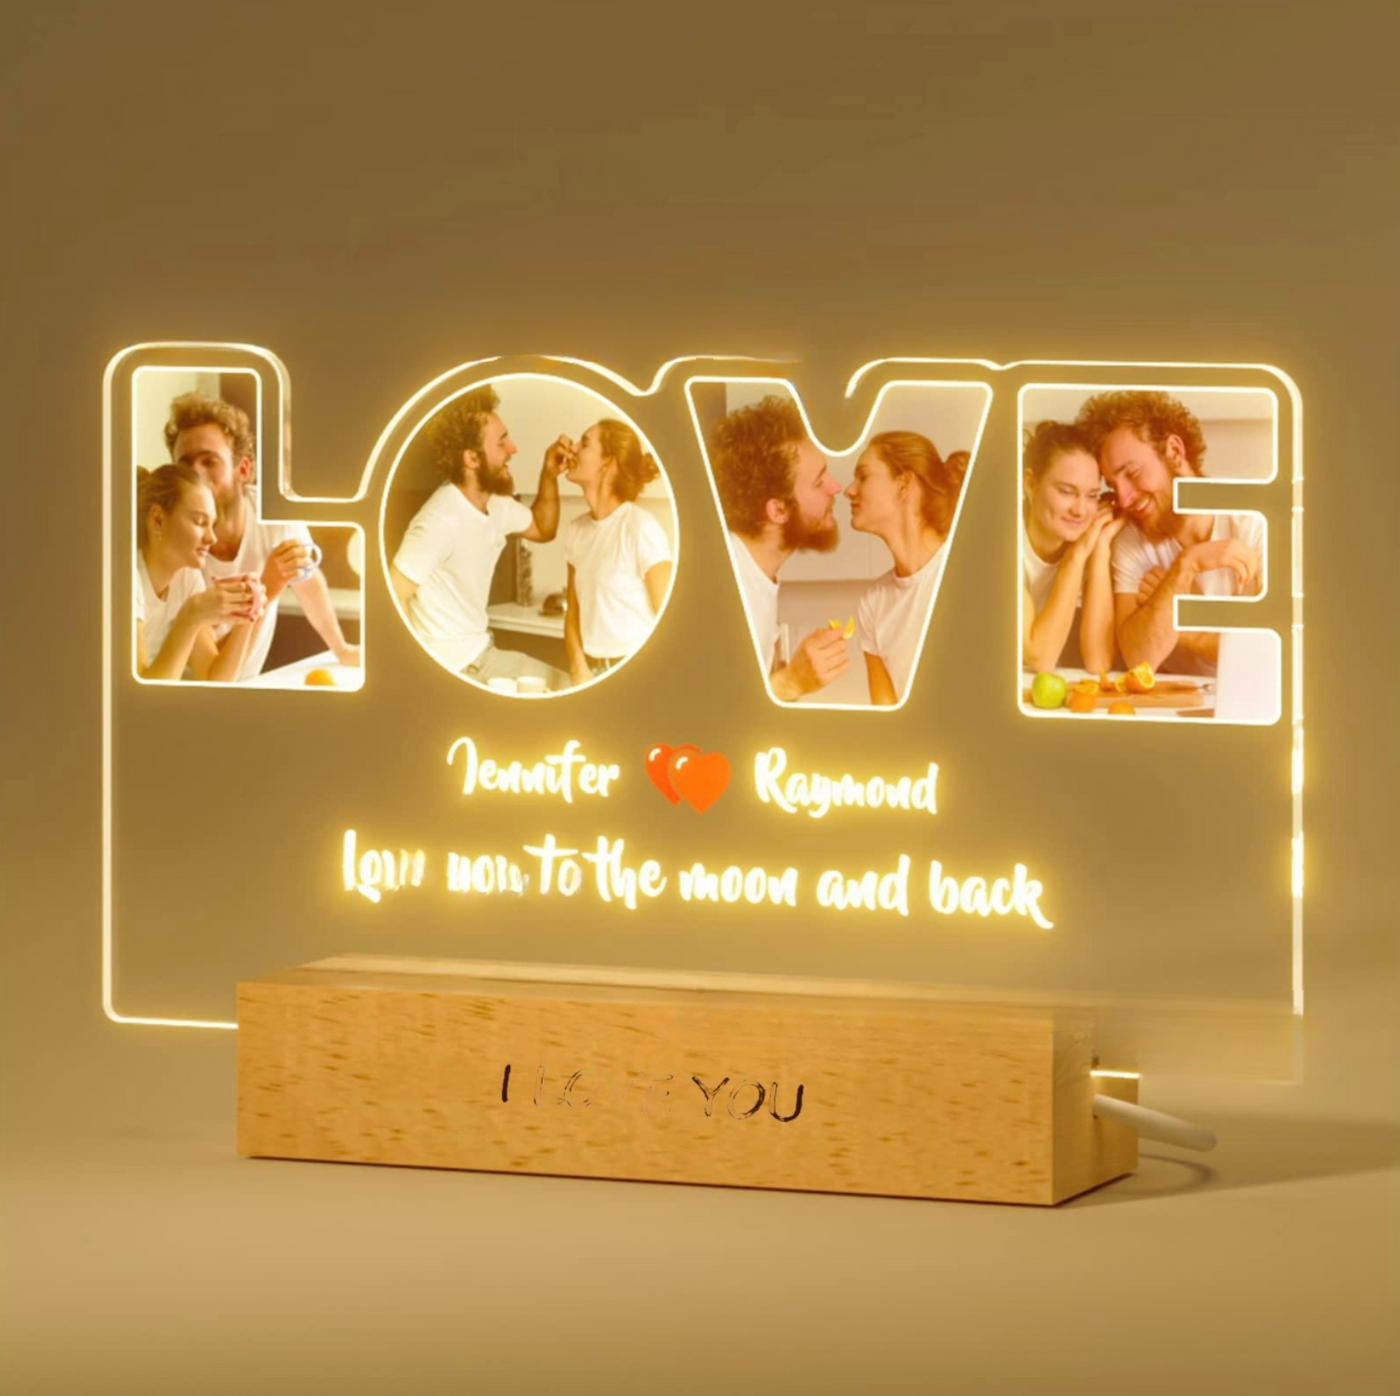 Personalized Photo Lamp, Photo Engraving, Custom Lamp Night Light, Custom 3D Lamp, Wedding Gift, unique gifts, Birthday Gift for Her